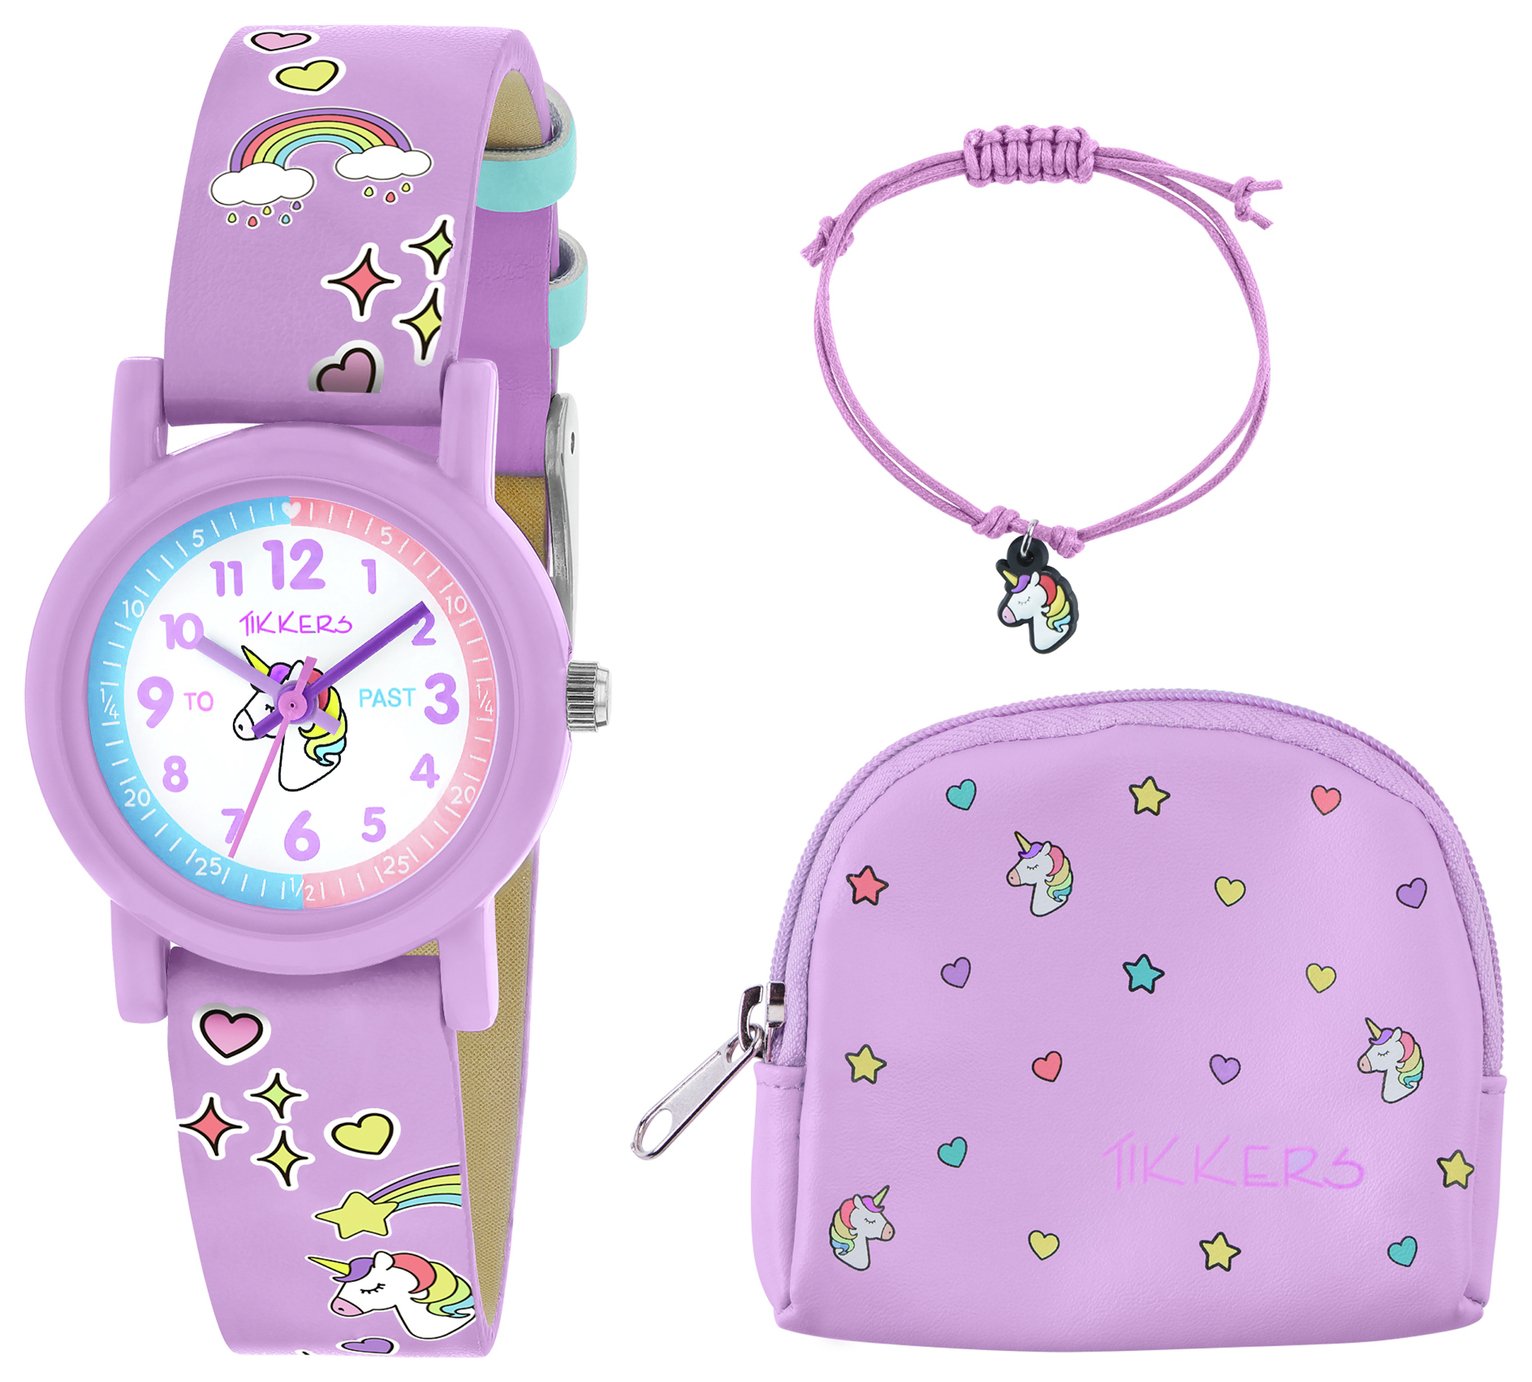 Tikkers Lilac Unicorn Watch, Necklace and Purse Set